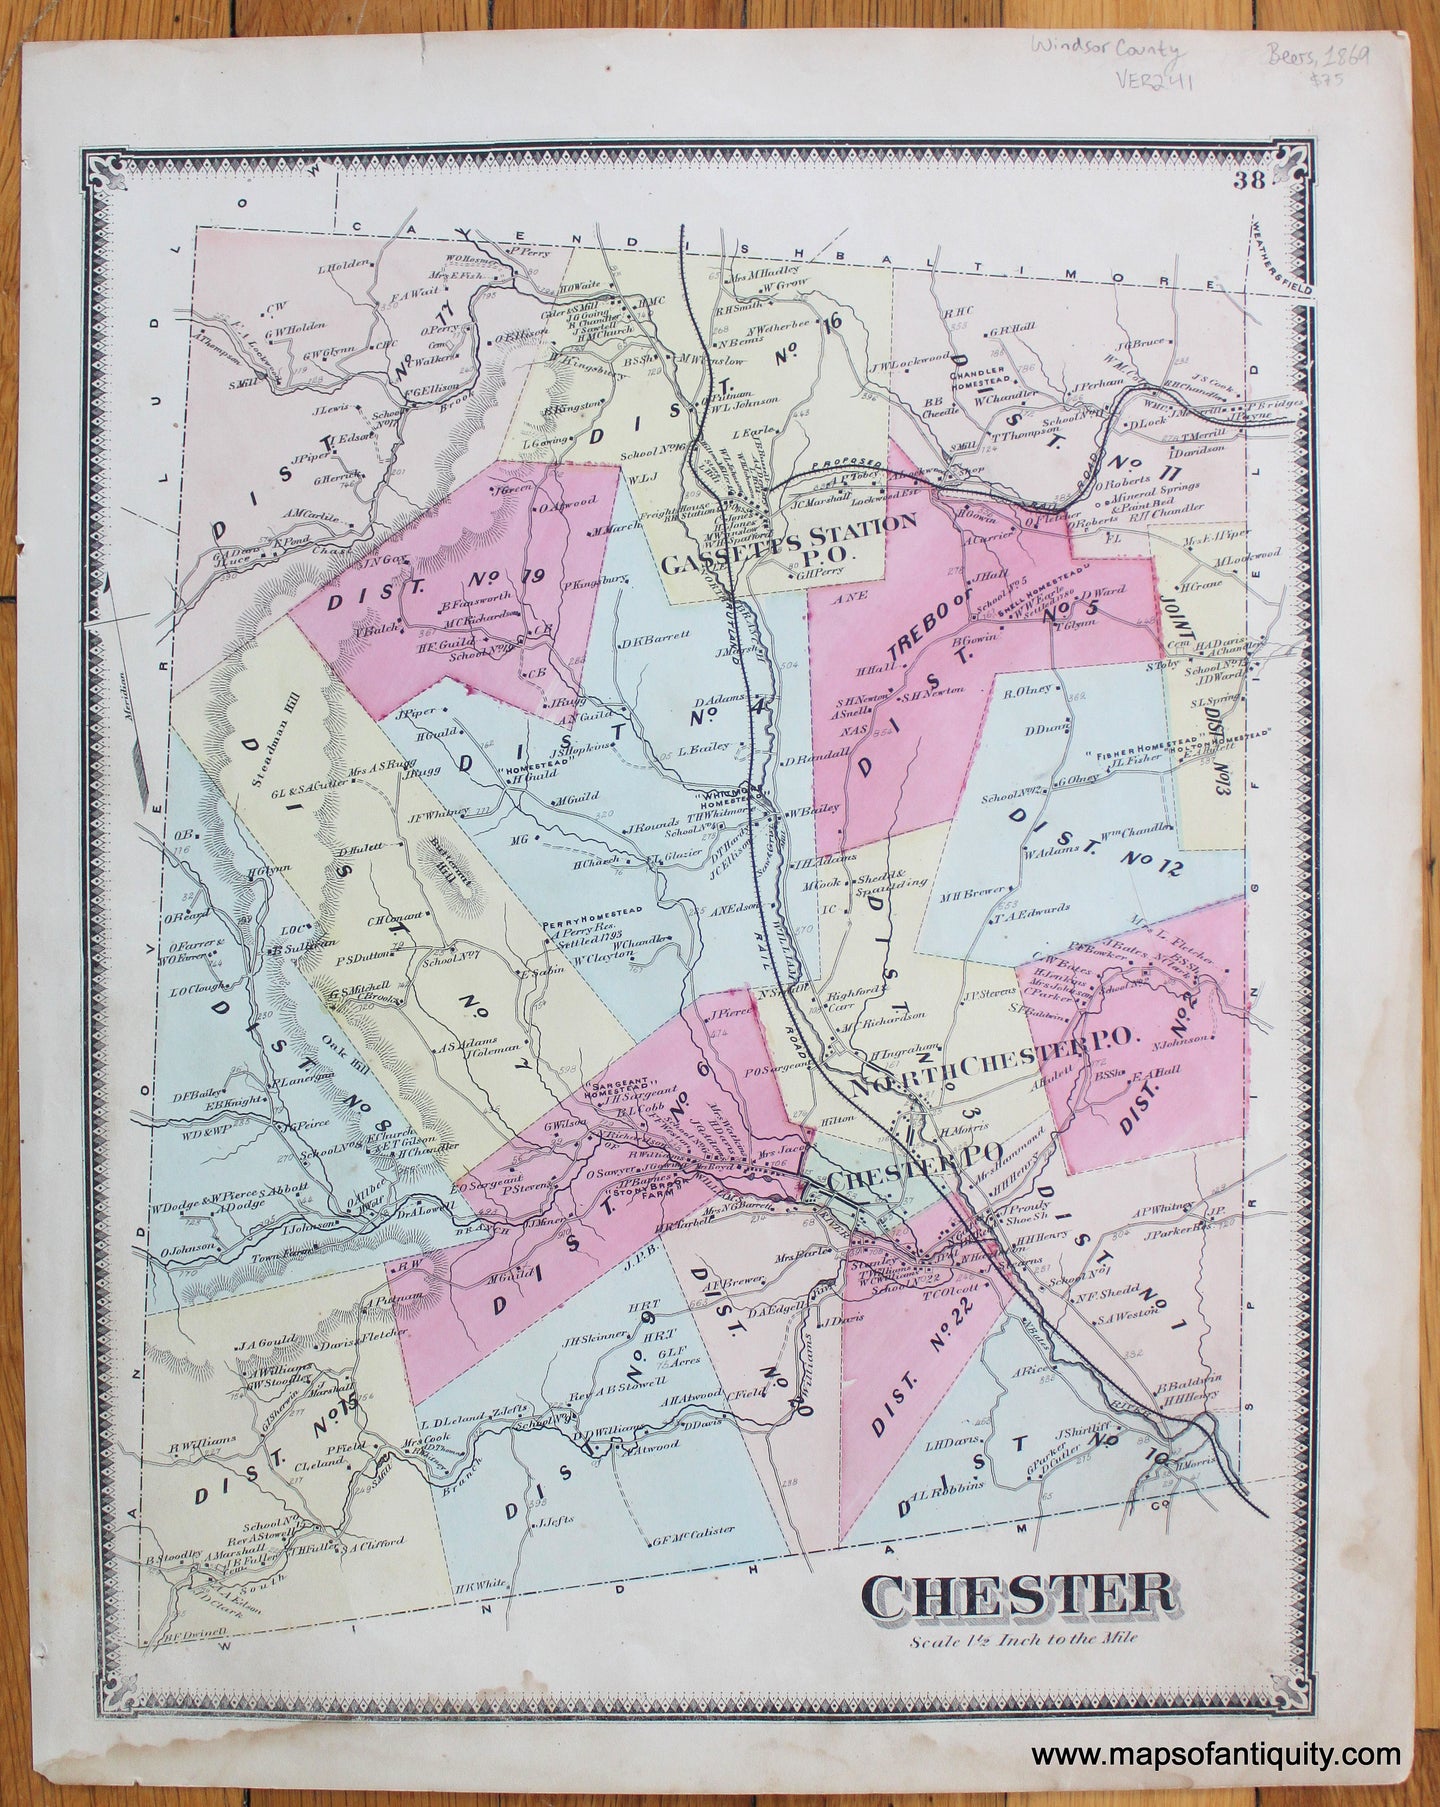 Antique-Map-Vermont-VT-Windsor-County-Town-Chester-Beers-1869-1860s-1800s-19th-Century-Maps-of-Antiquity